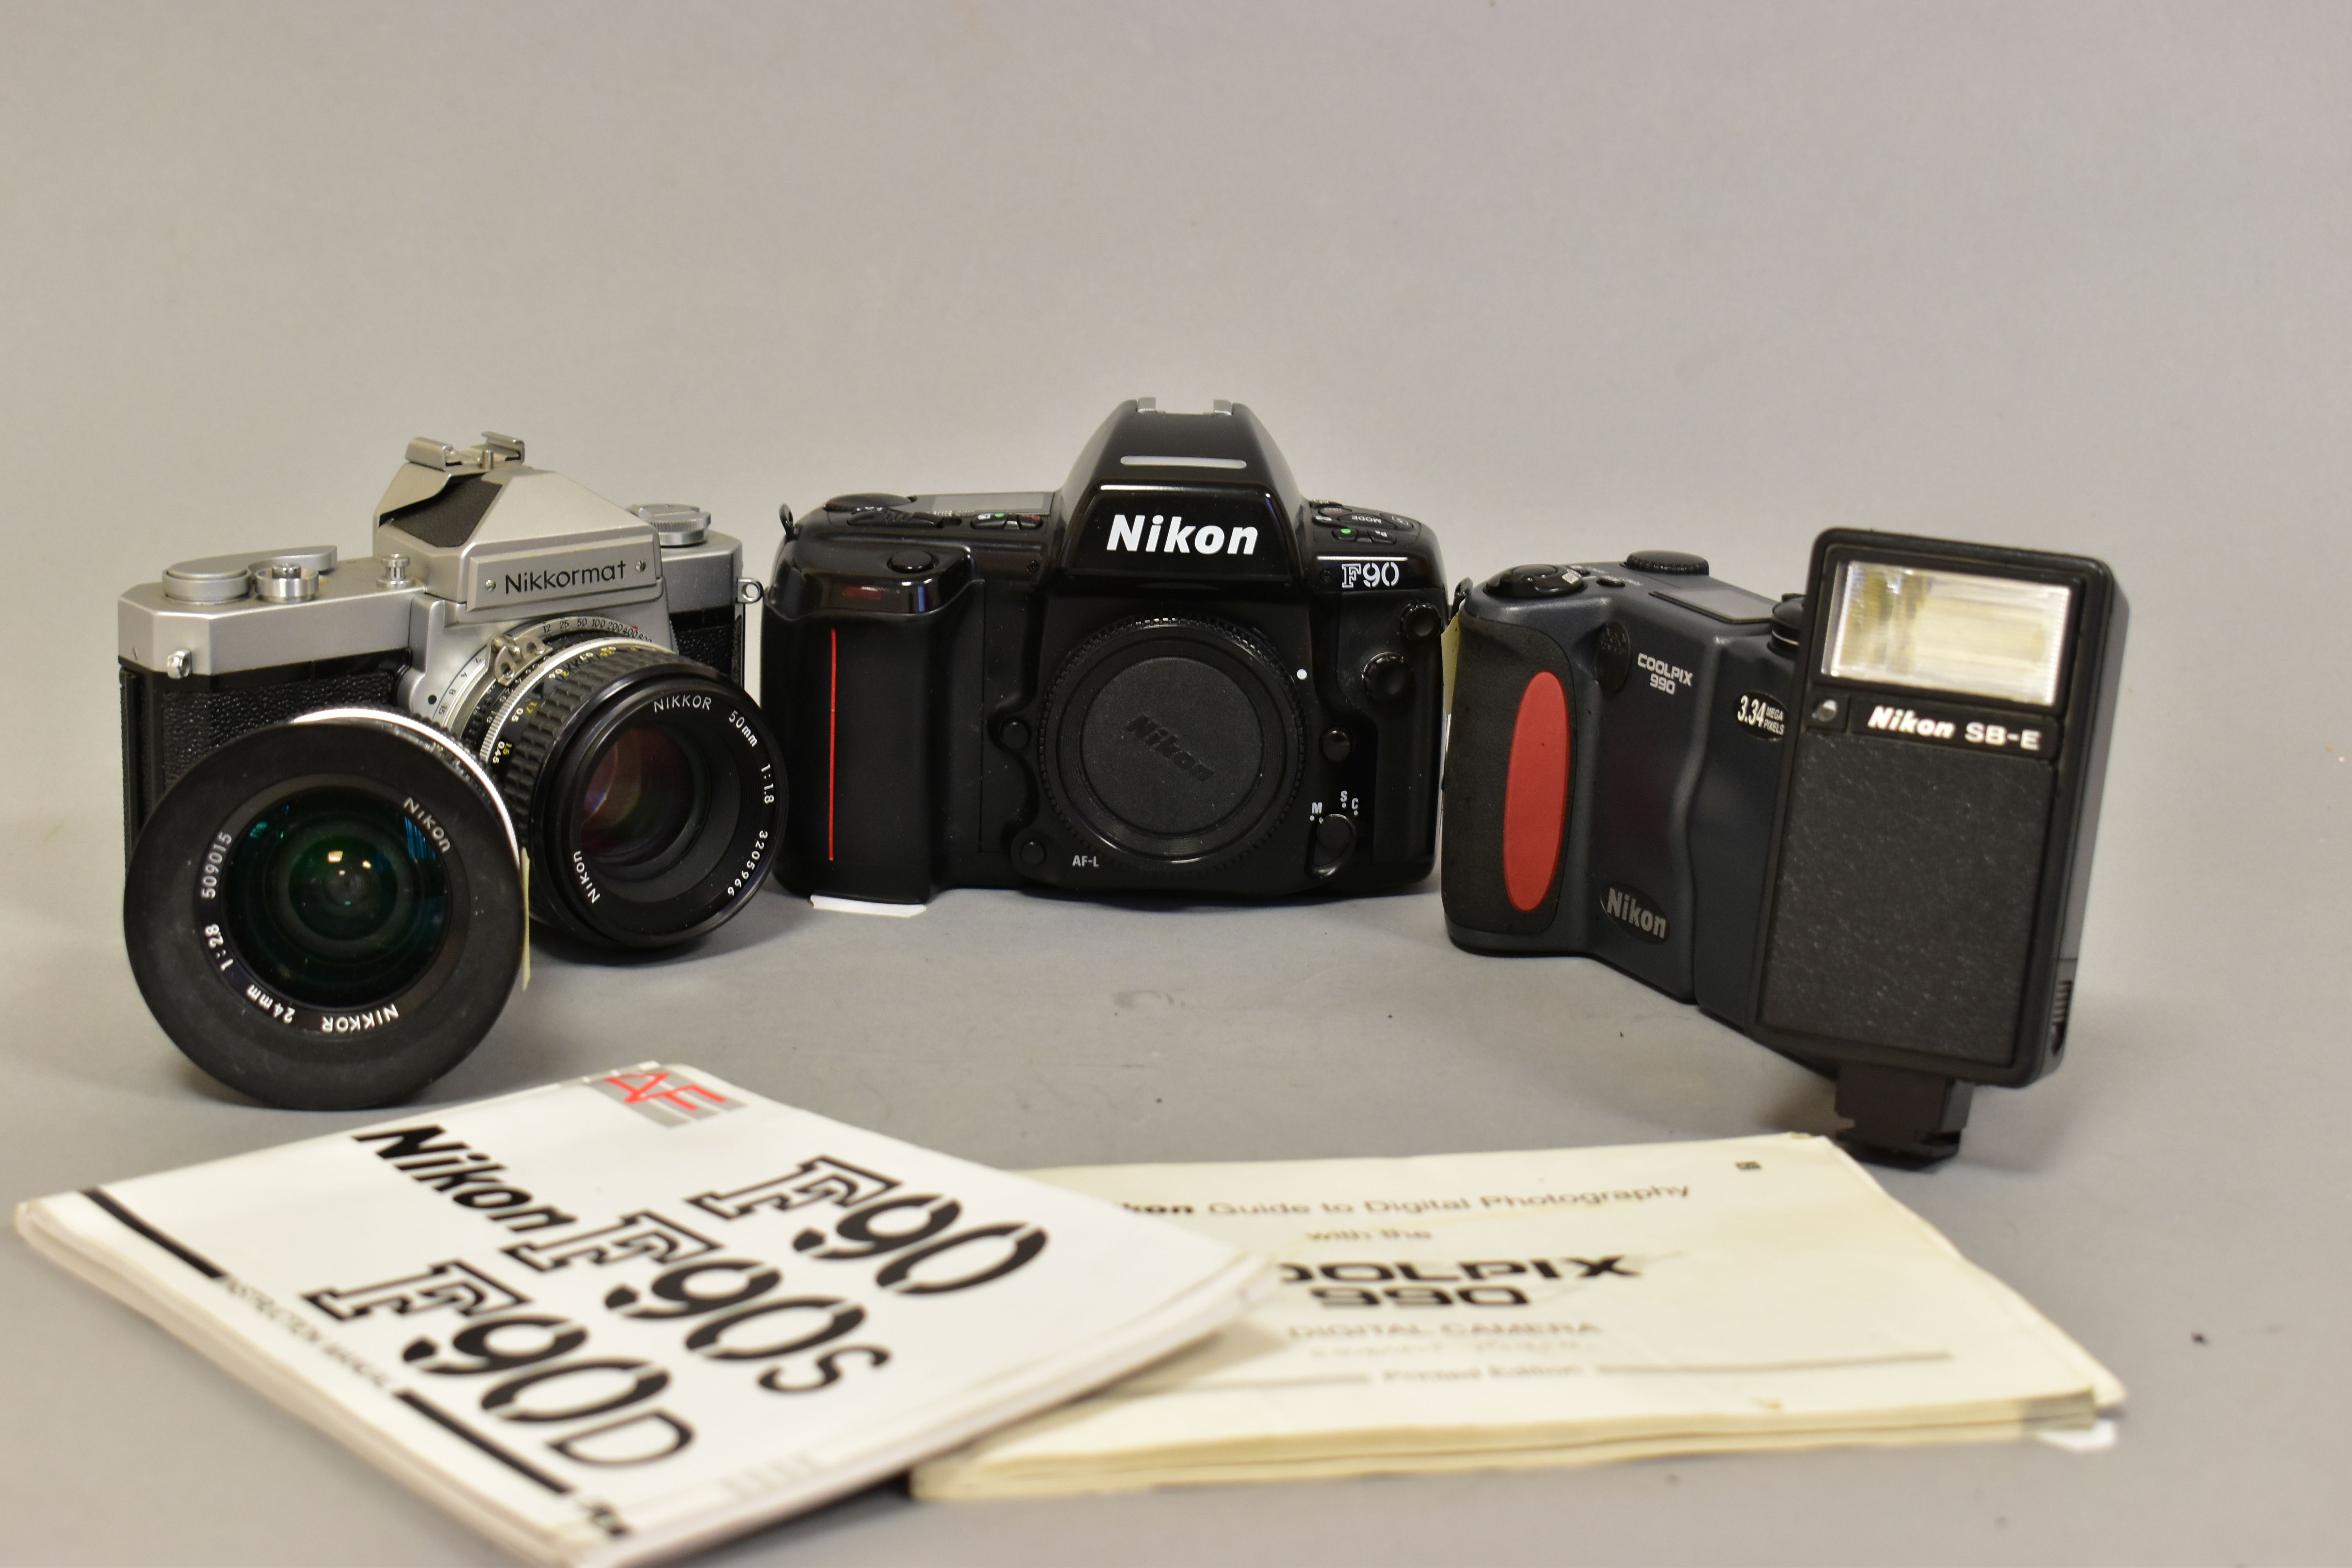 A NIKKORMAT FT FILM SLR CAMERA fitted with a 50mm f1.8 lens, a 24mm f2.8 lens, a F90 film SLR